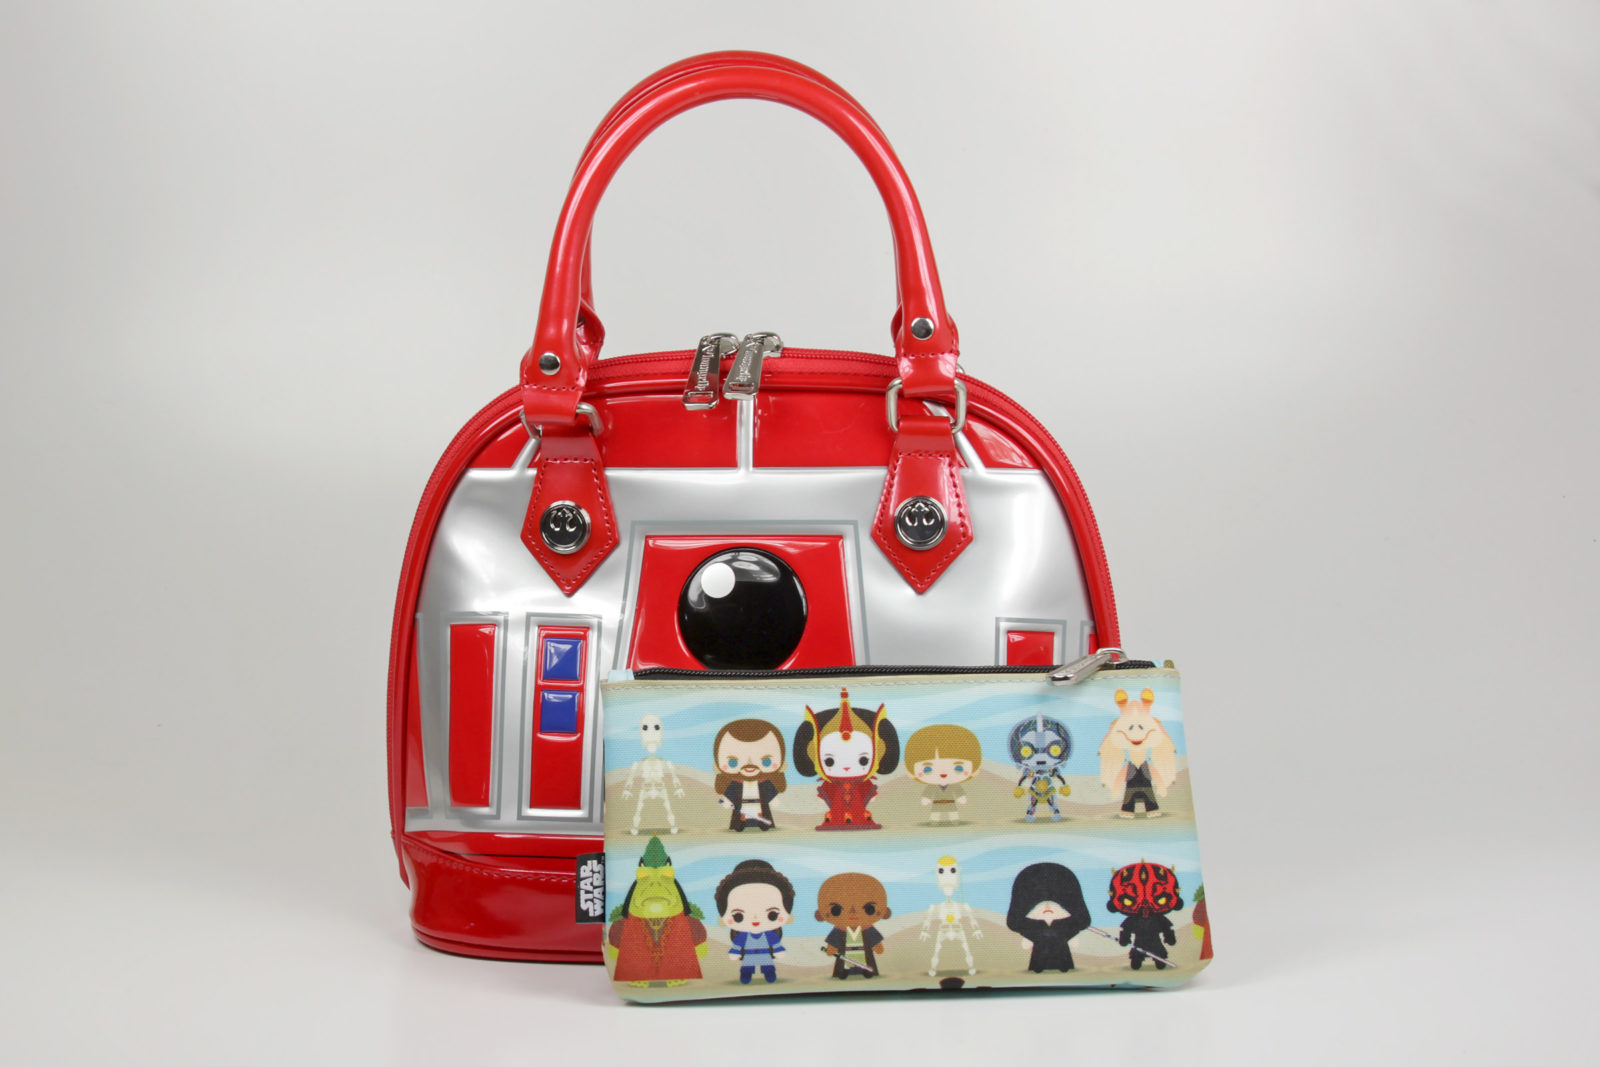 Star Wars The Phantom Menace bags by Loungefly